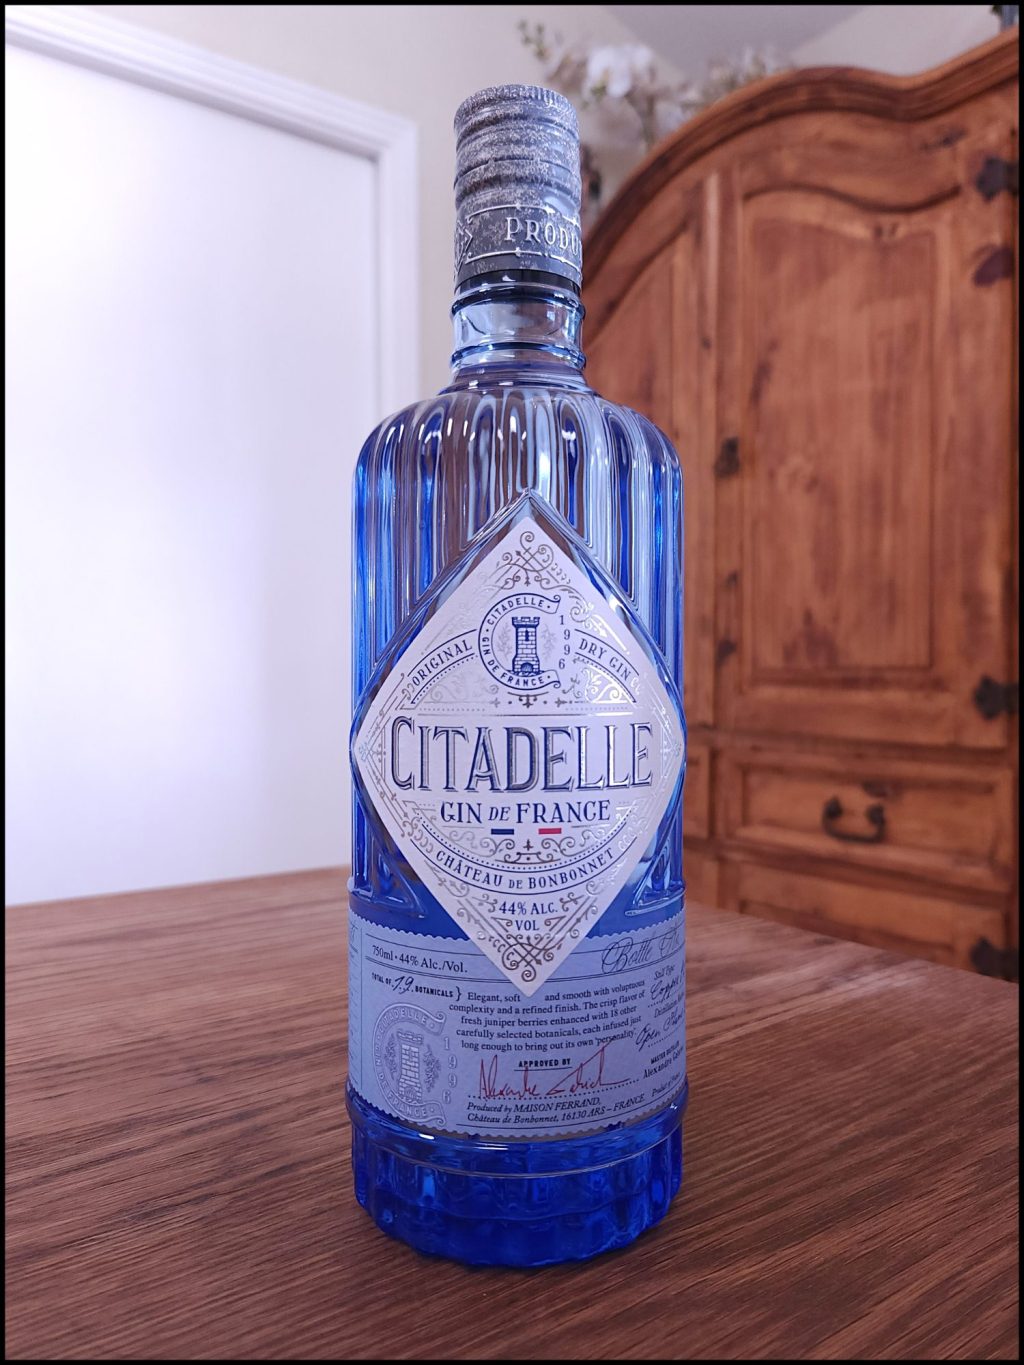 Bottle of Citadelle Original Gin on a wooden table, in front of a mixed white and wooden background